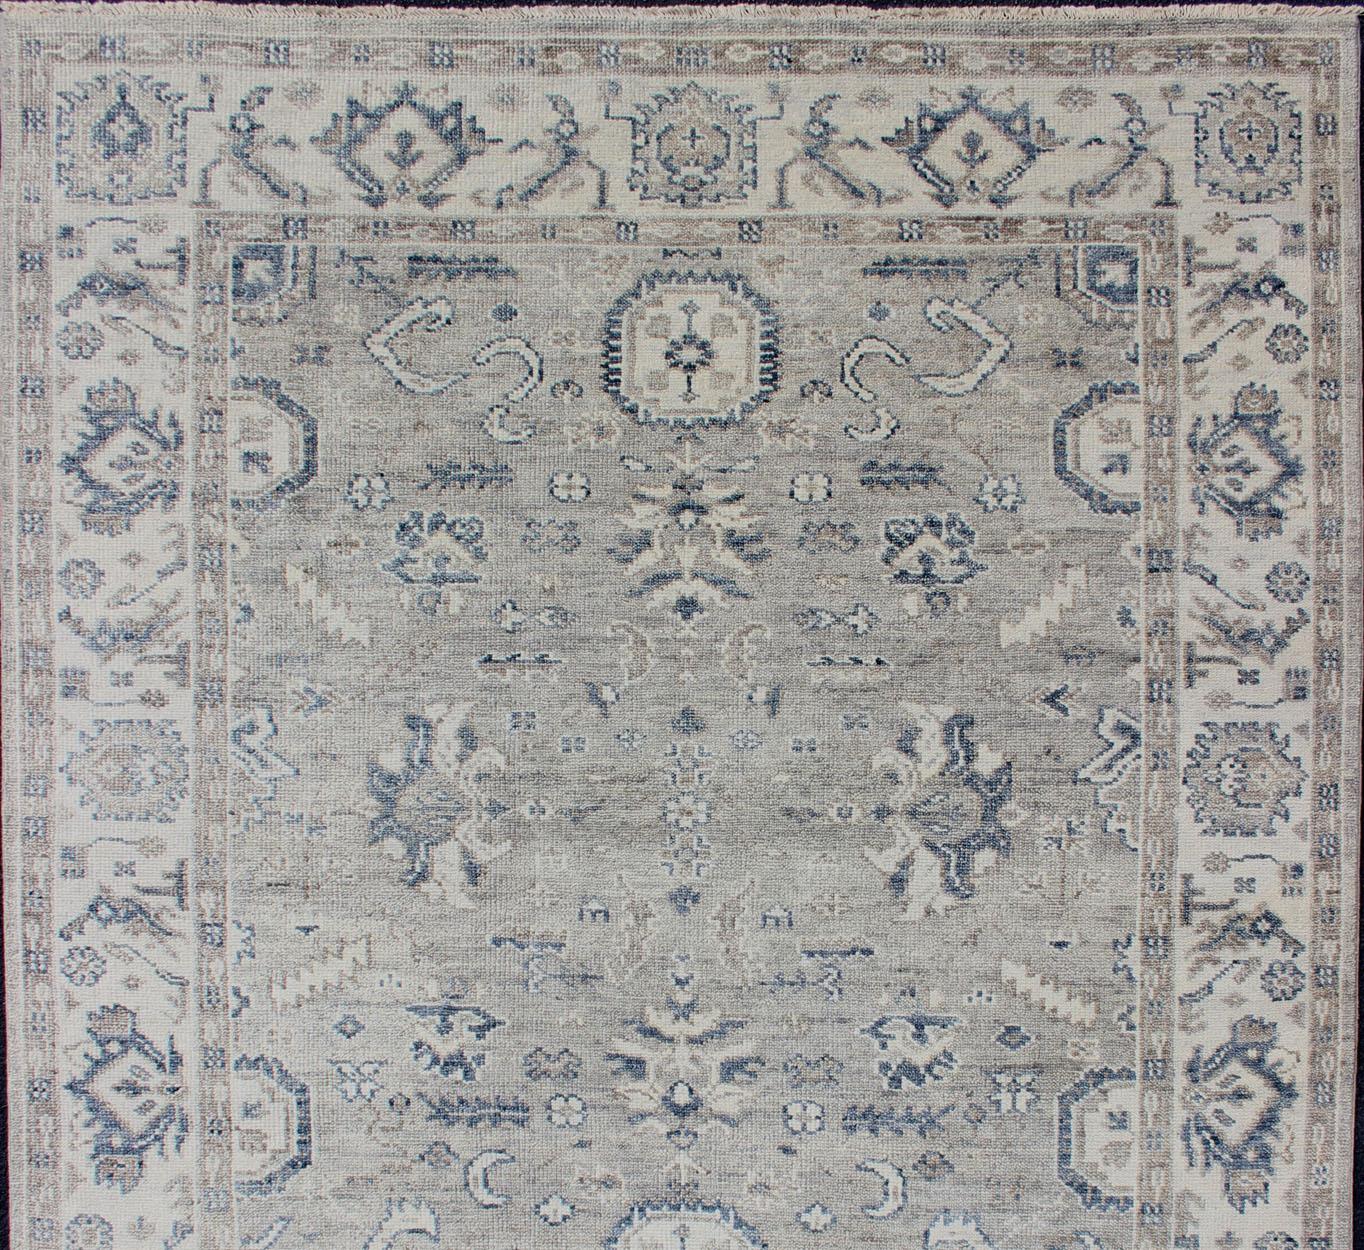 Hand-Knotted Indian Wool Oushak Rug in Cool Neutral Tones In Excellent Condition For Sale In Atlanta, GA